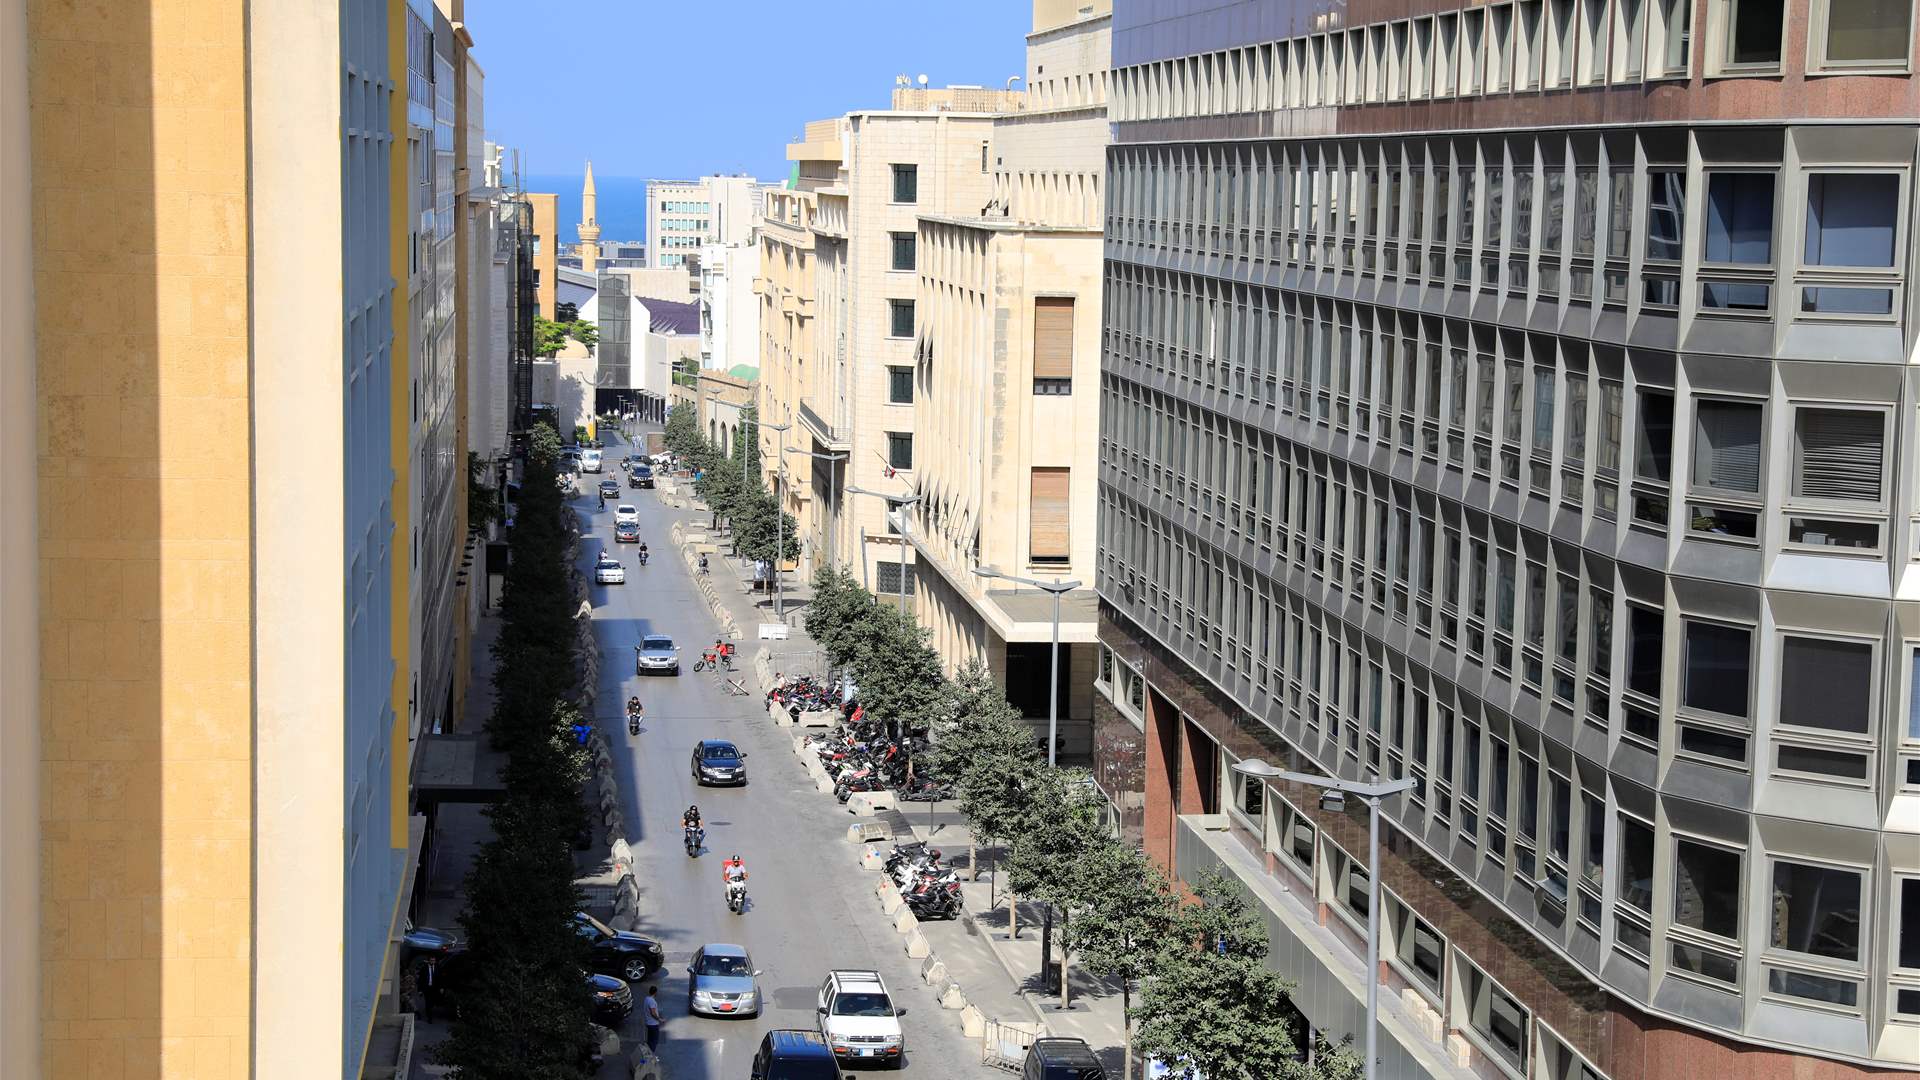 Syrian business owners in Lebanon: Challenges and regulation